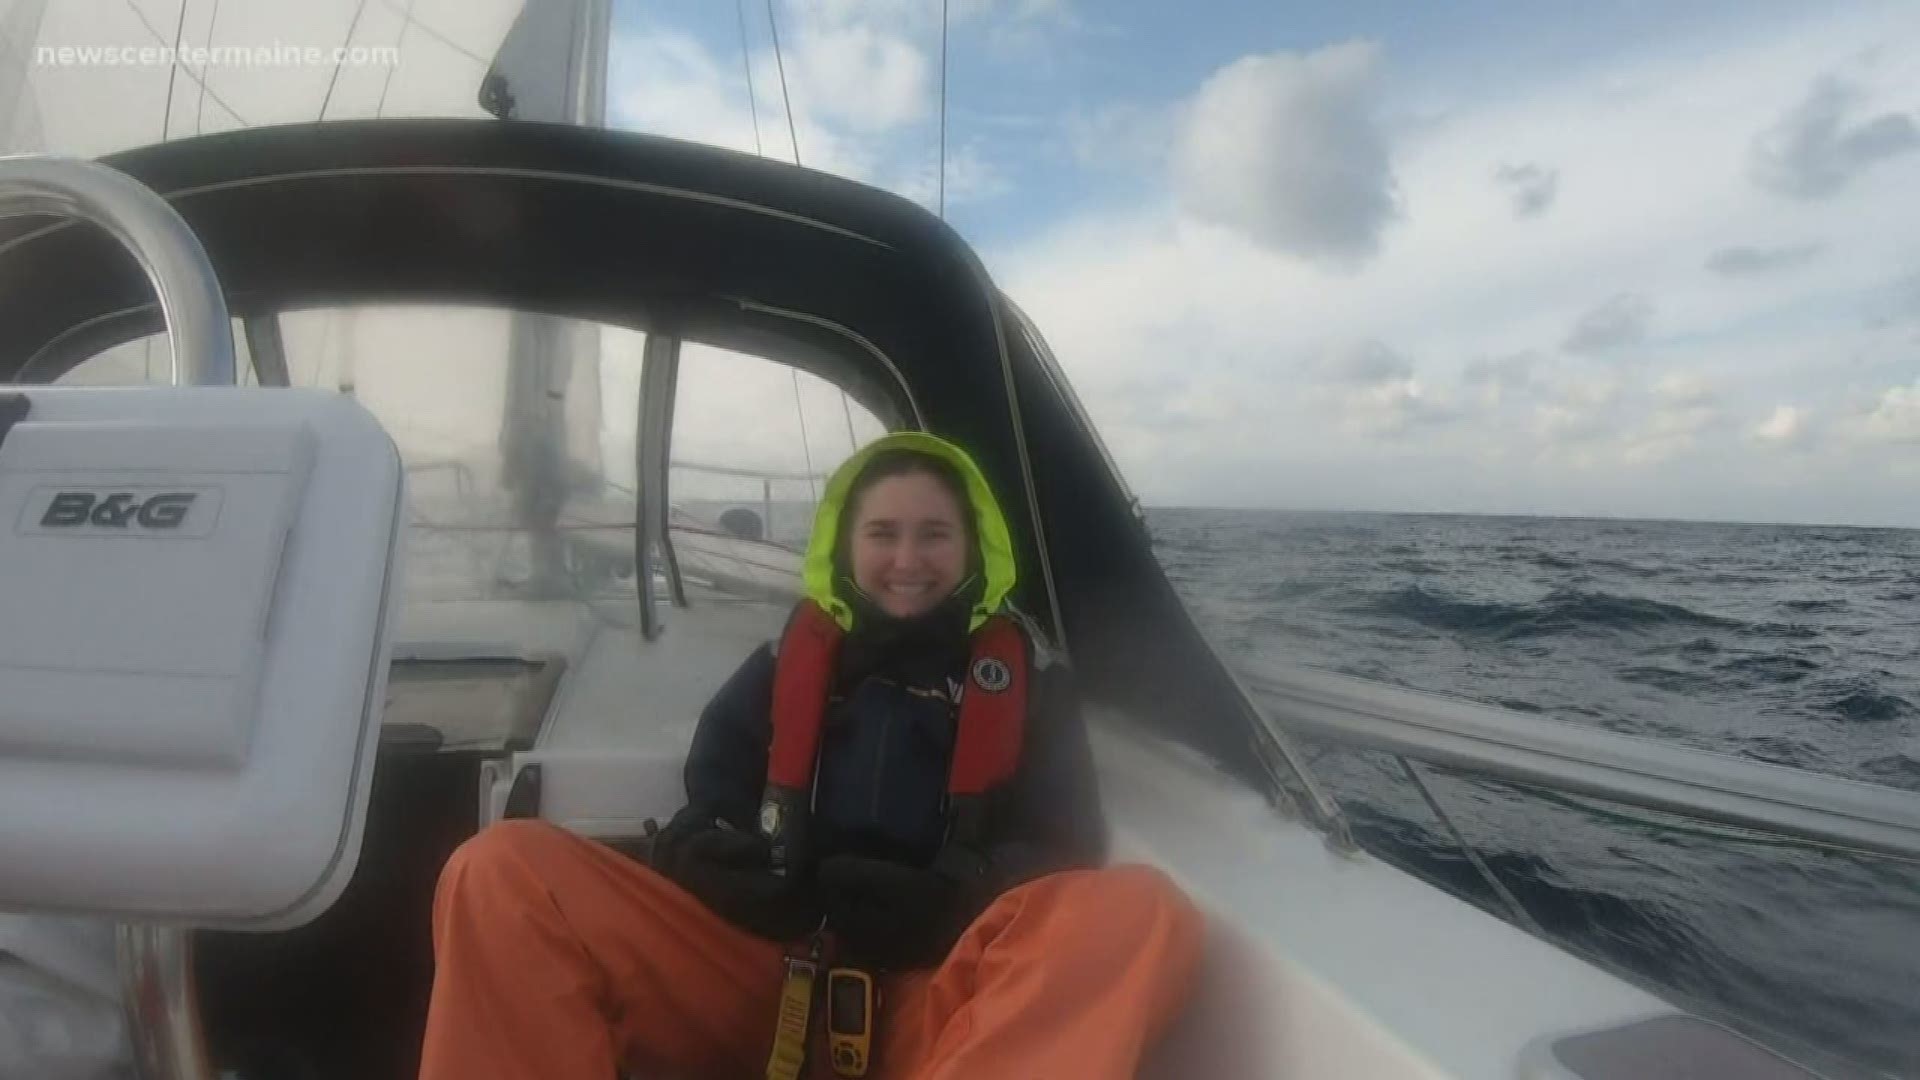 Sailors speak about being stranded at sea